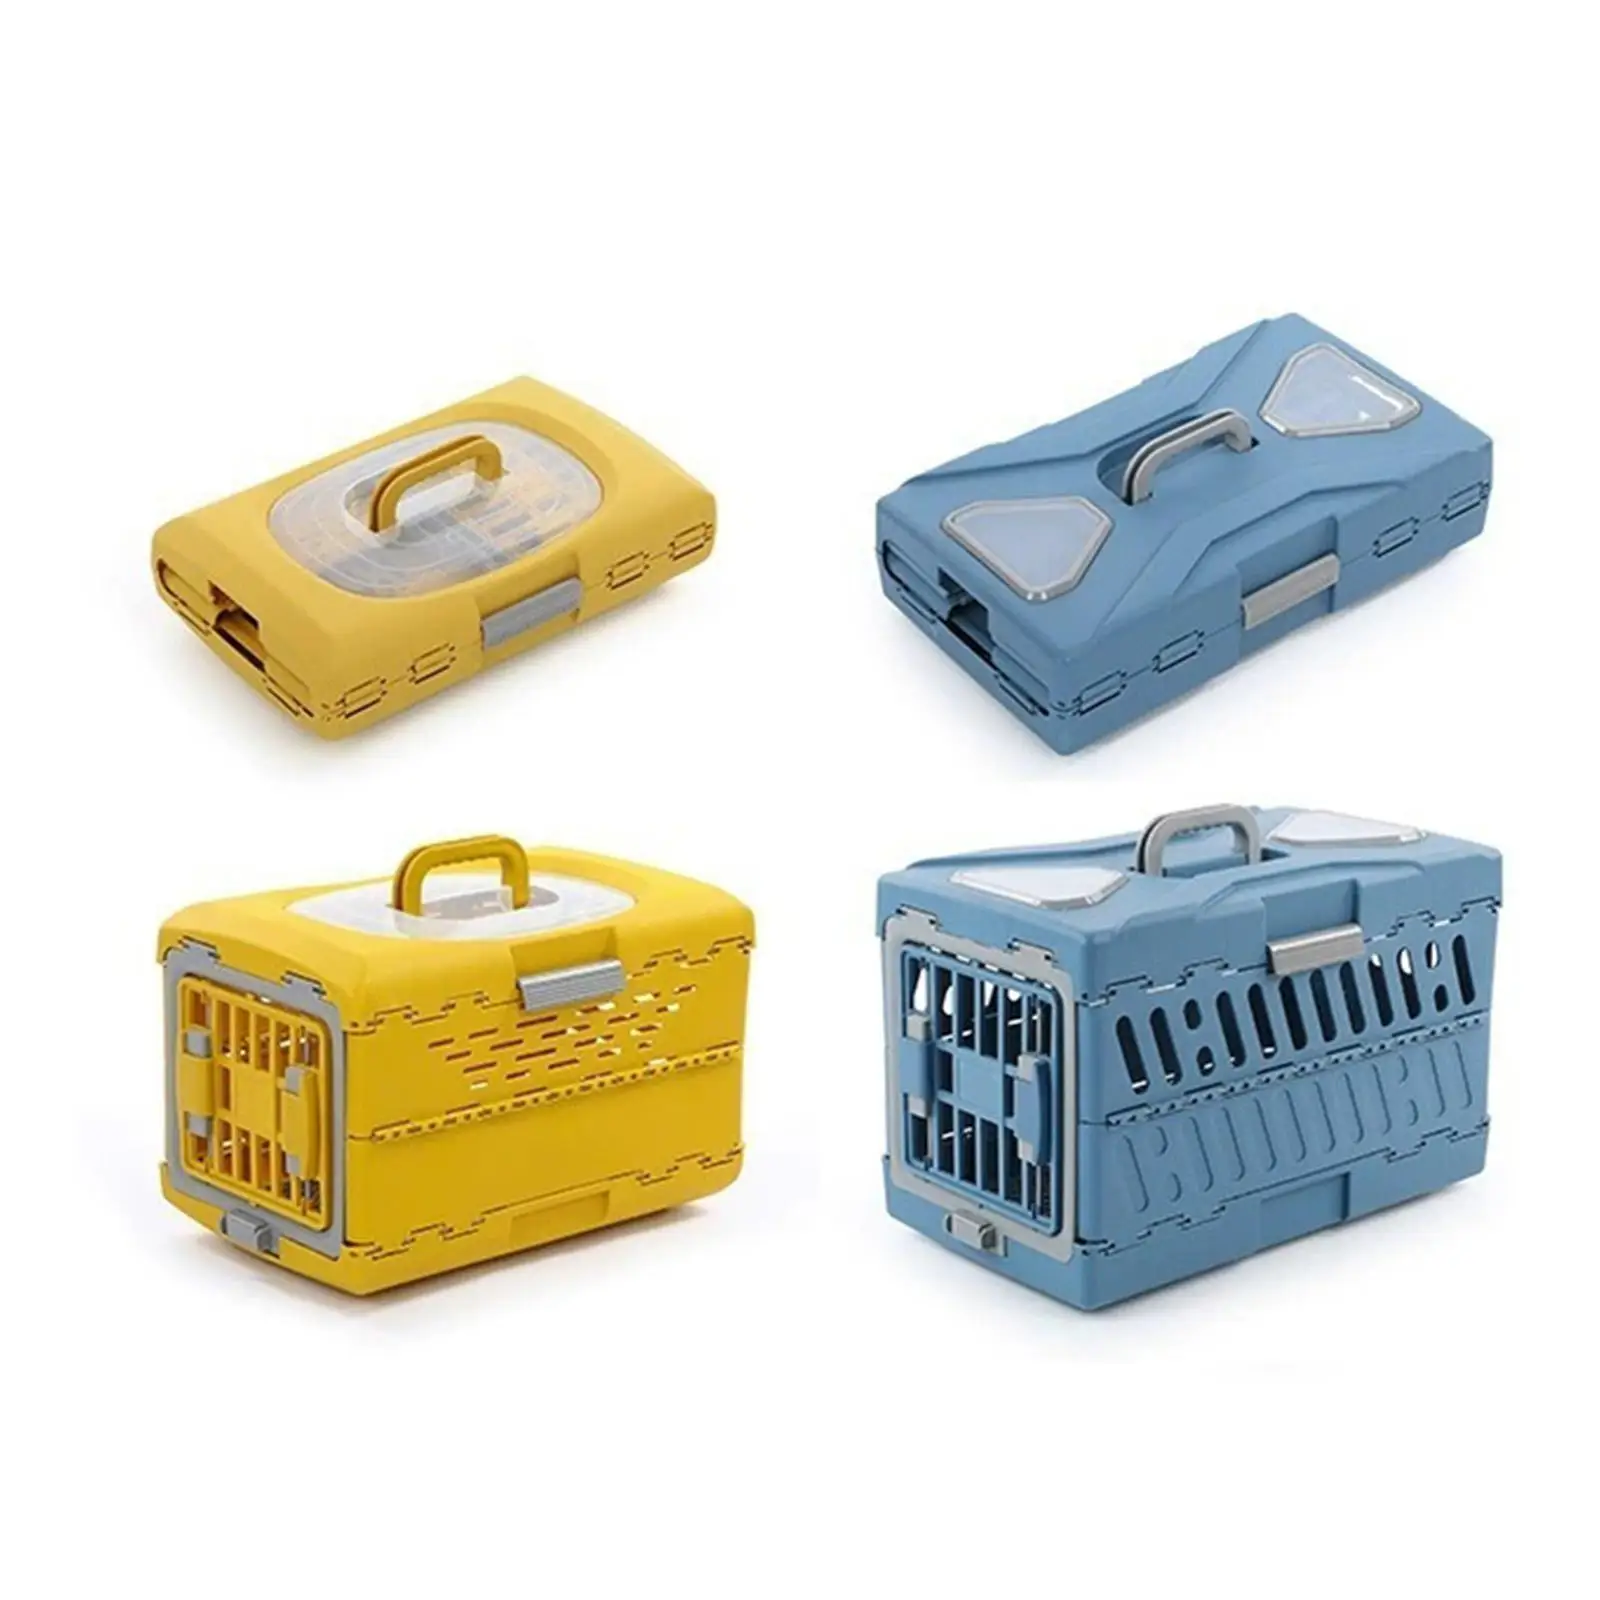 Collapsible Puppy Crate Portable Dog Kennel for Puppy Small Dogs Rabbit